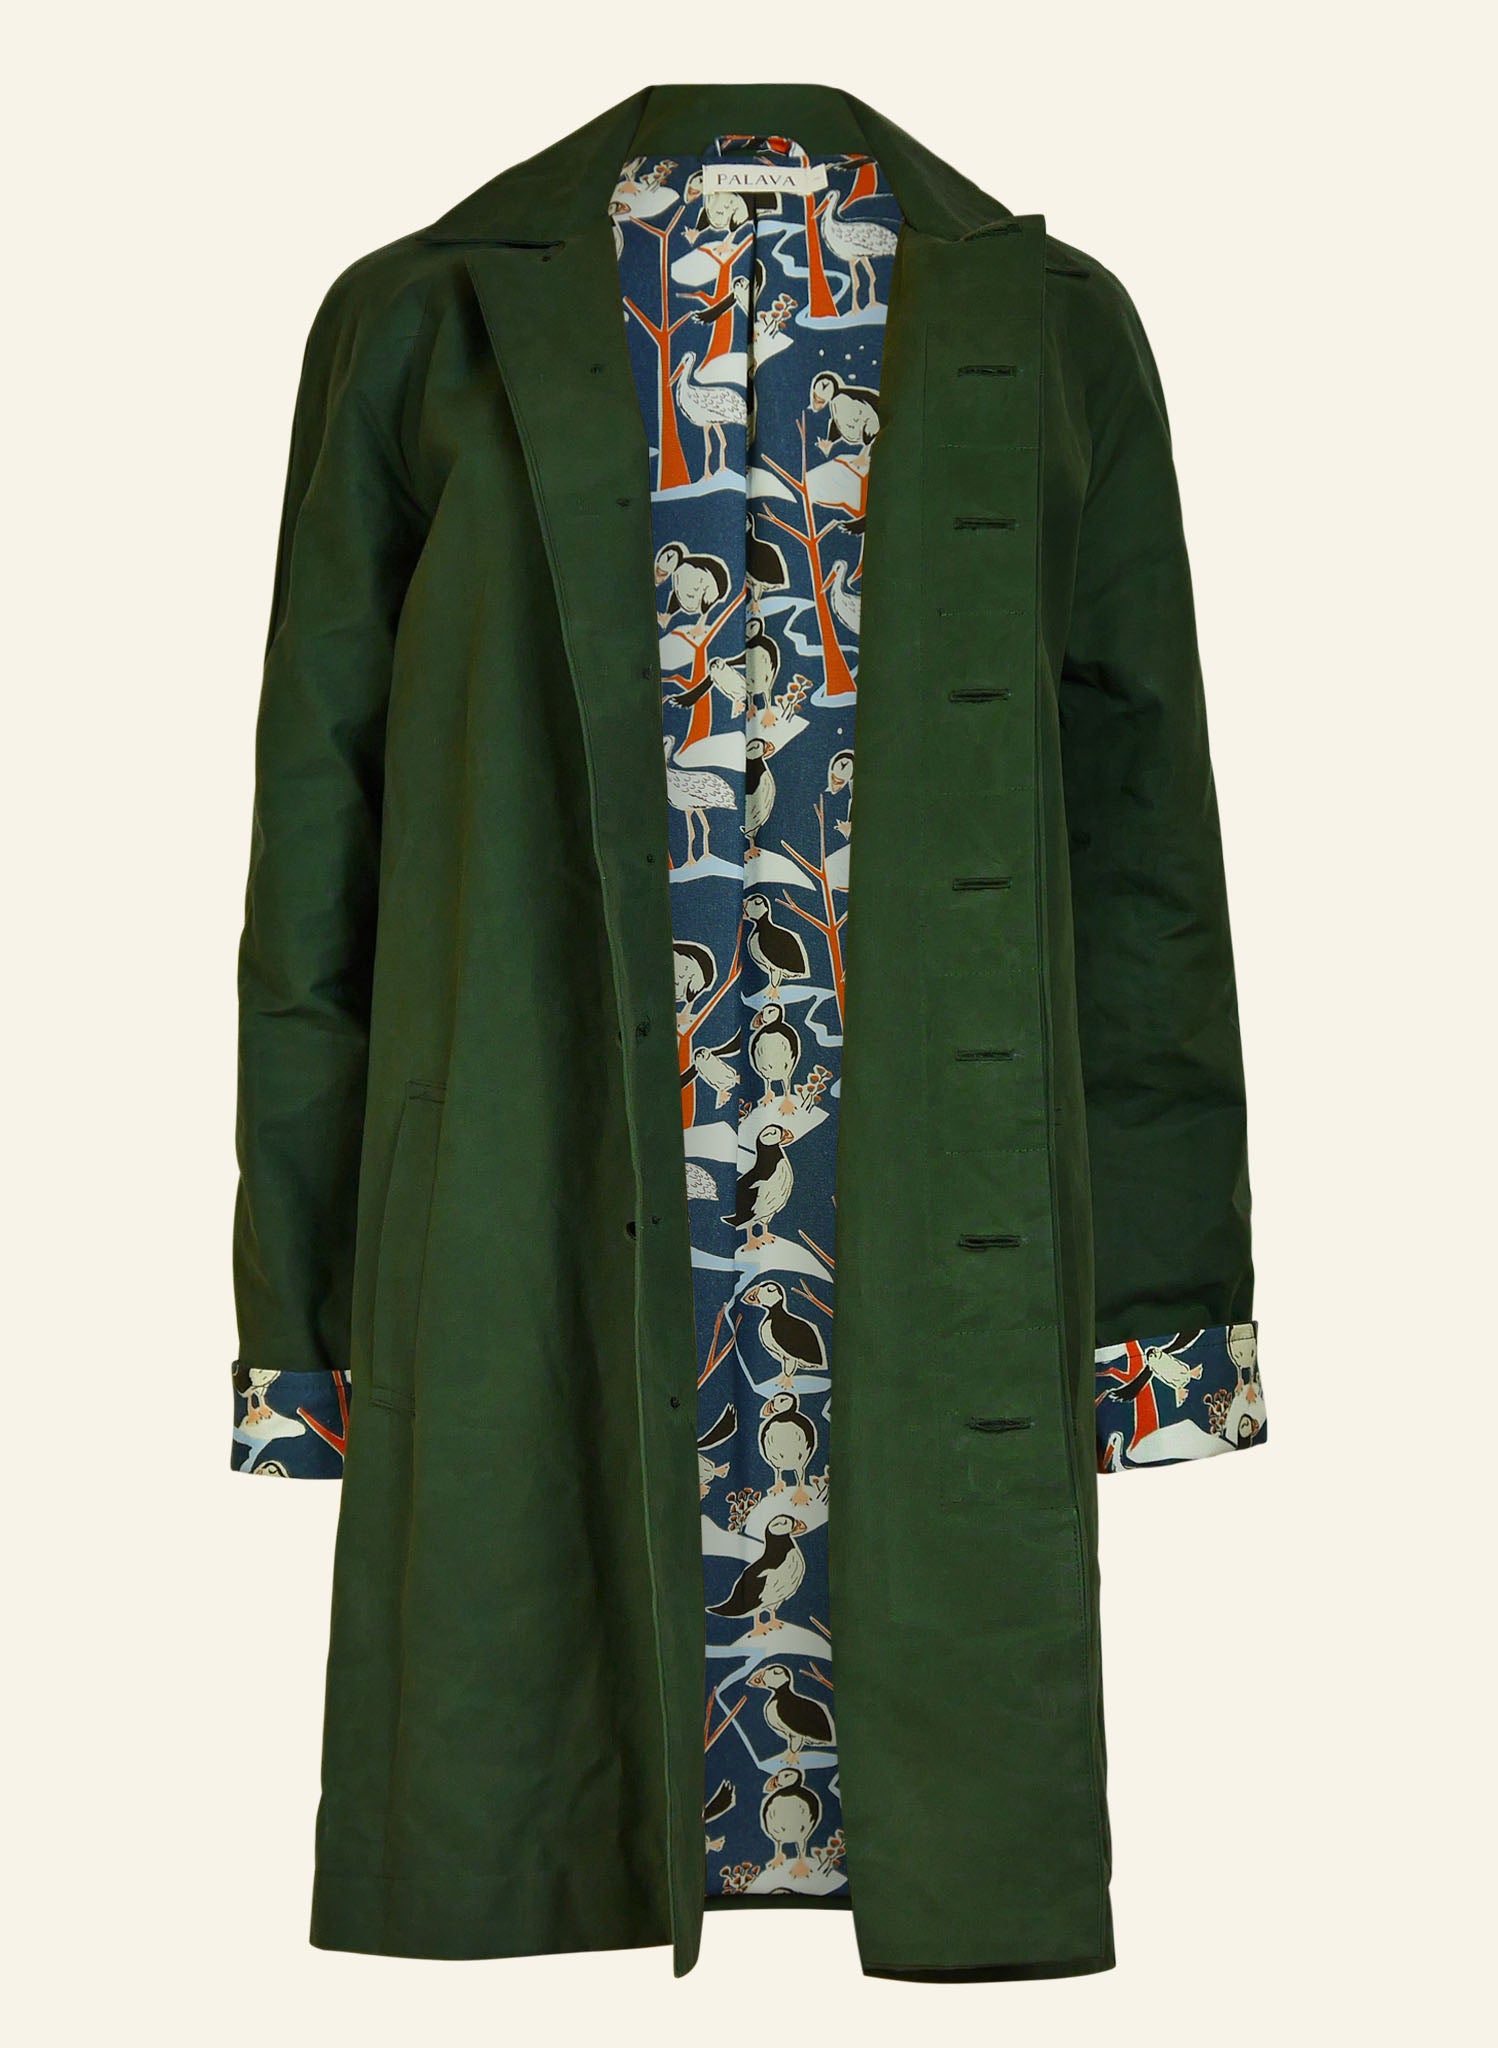 Heritage - Dark Green Trench Coat Puffin Lining